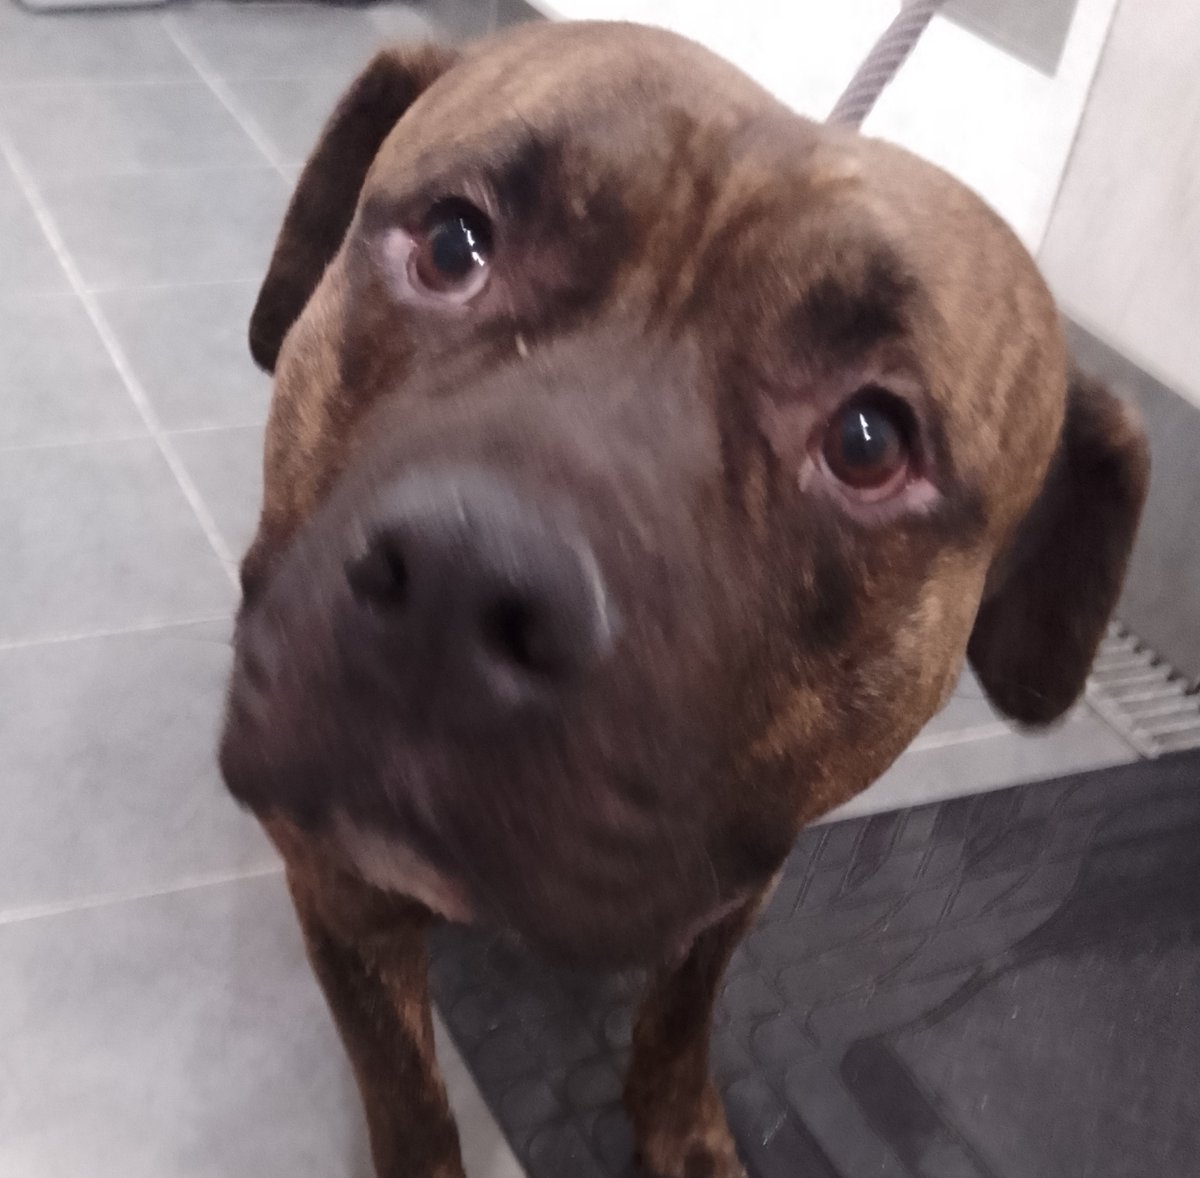 Please retweet to HELP FIND THE OWNER OR A RESCUE SPACE FOR THIS STRAY/ABANDONED DOG FOUND #ORPINGTON #BROMLEY #LONDON #UK 🆘RESCUE SHELTER SPACE NEEDED🆘 American Bulldog, Male, chip not registered, found 1 February. Now in a council pound, he could be missing or stolen…